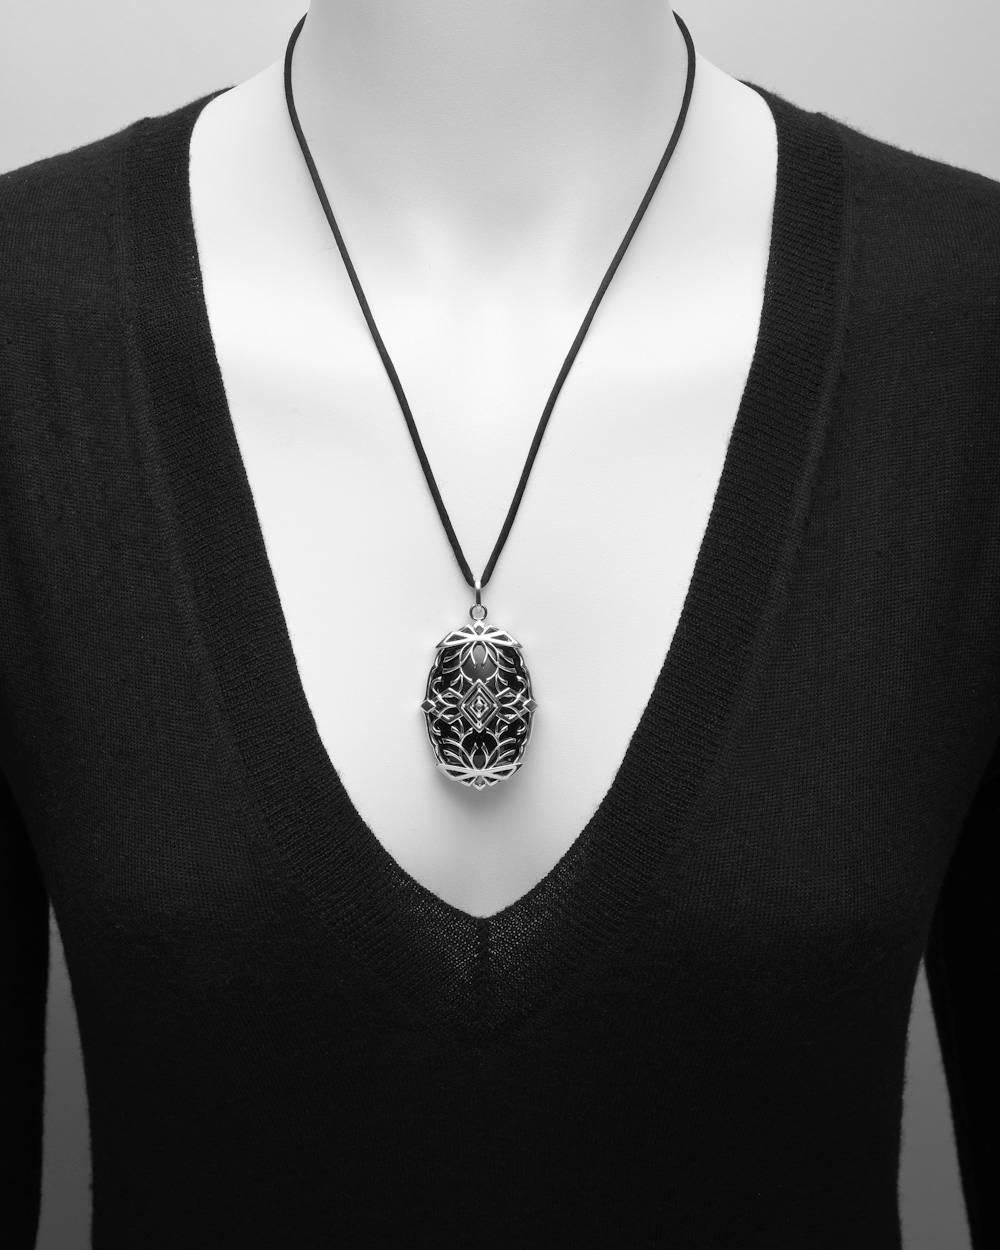 Large oval-shaped black onyx pendant, with polished scroll work cage motif in 18k white gold accented by round-cut diamonds, on a 24" black silk cord. Diamonds altogether weighing approximately 1.20 total carats. Designed by Ivanka Trump.